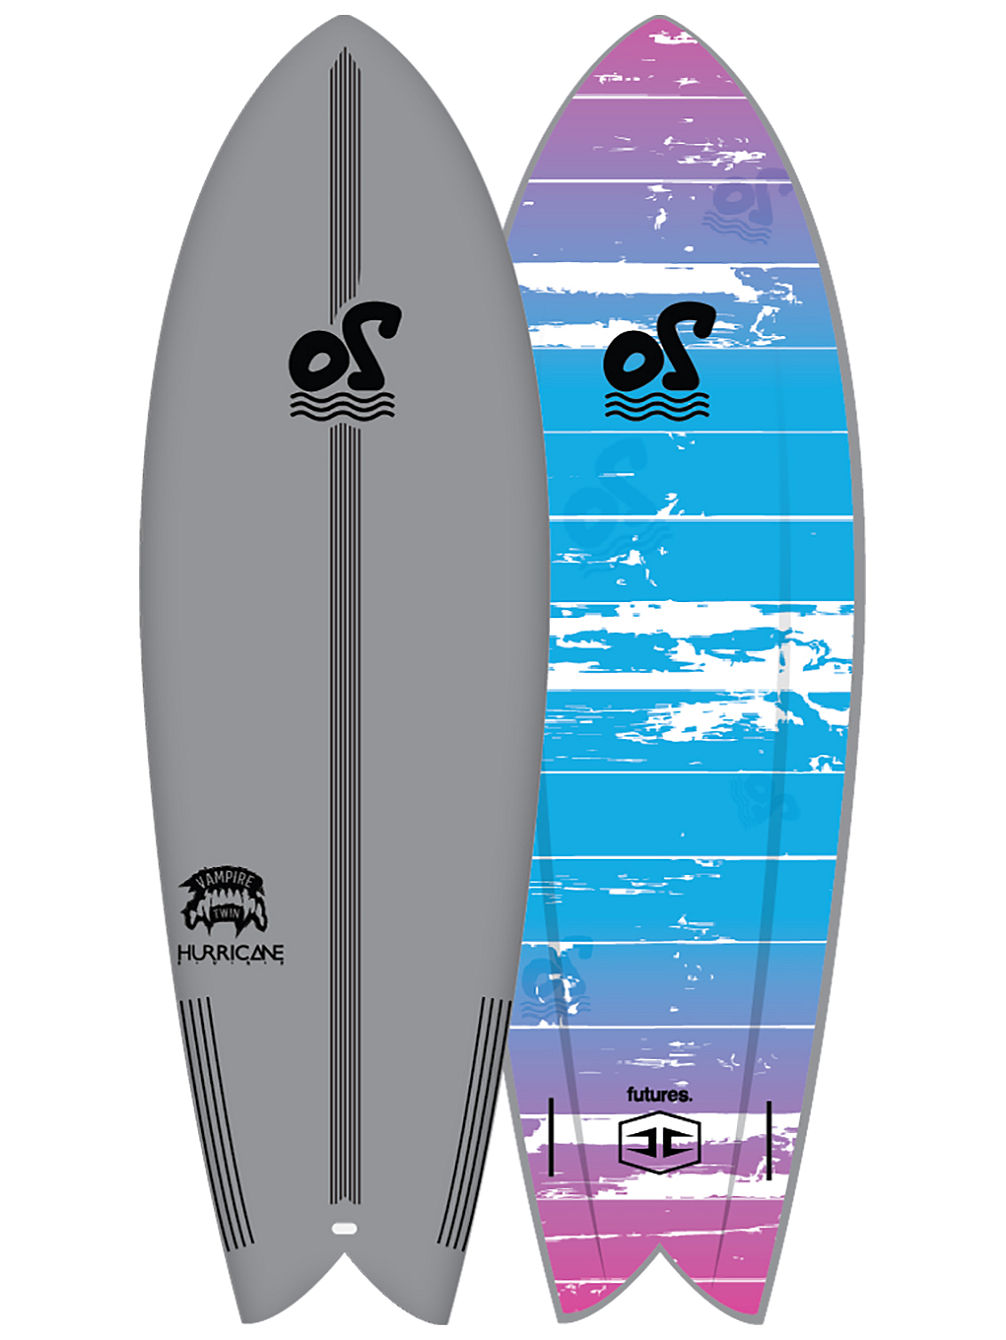 Vampire Twin 5&amp;#039;10 Softtop Surfboard